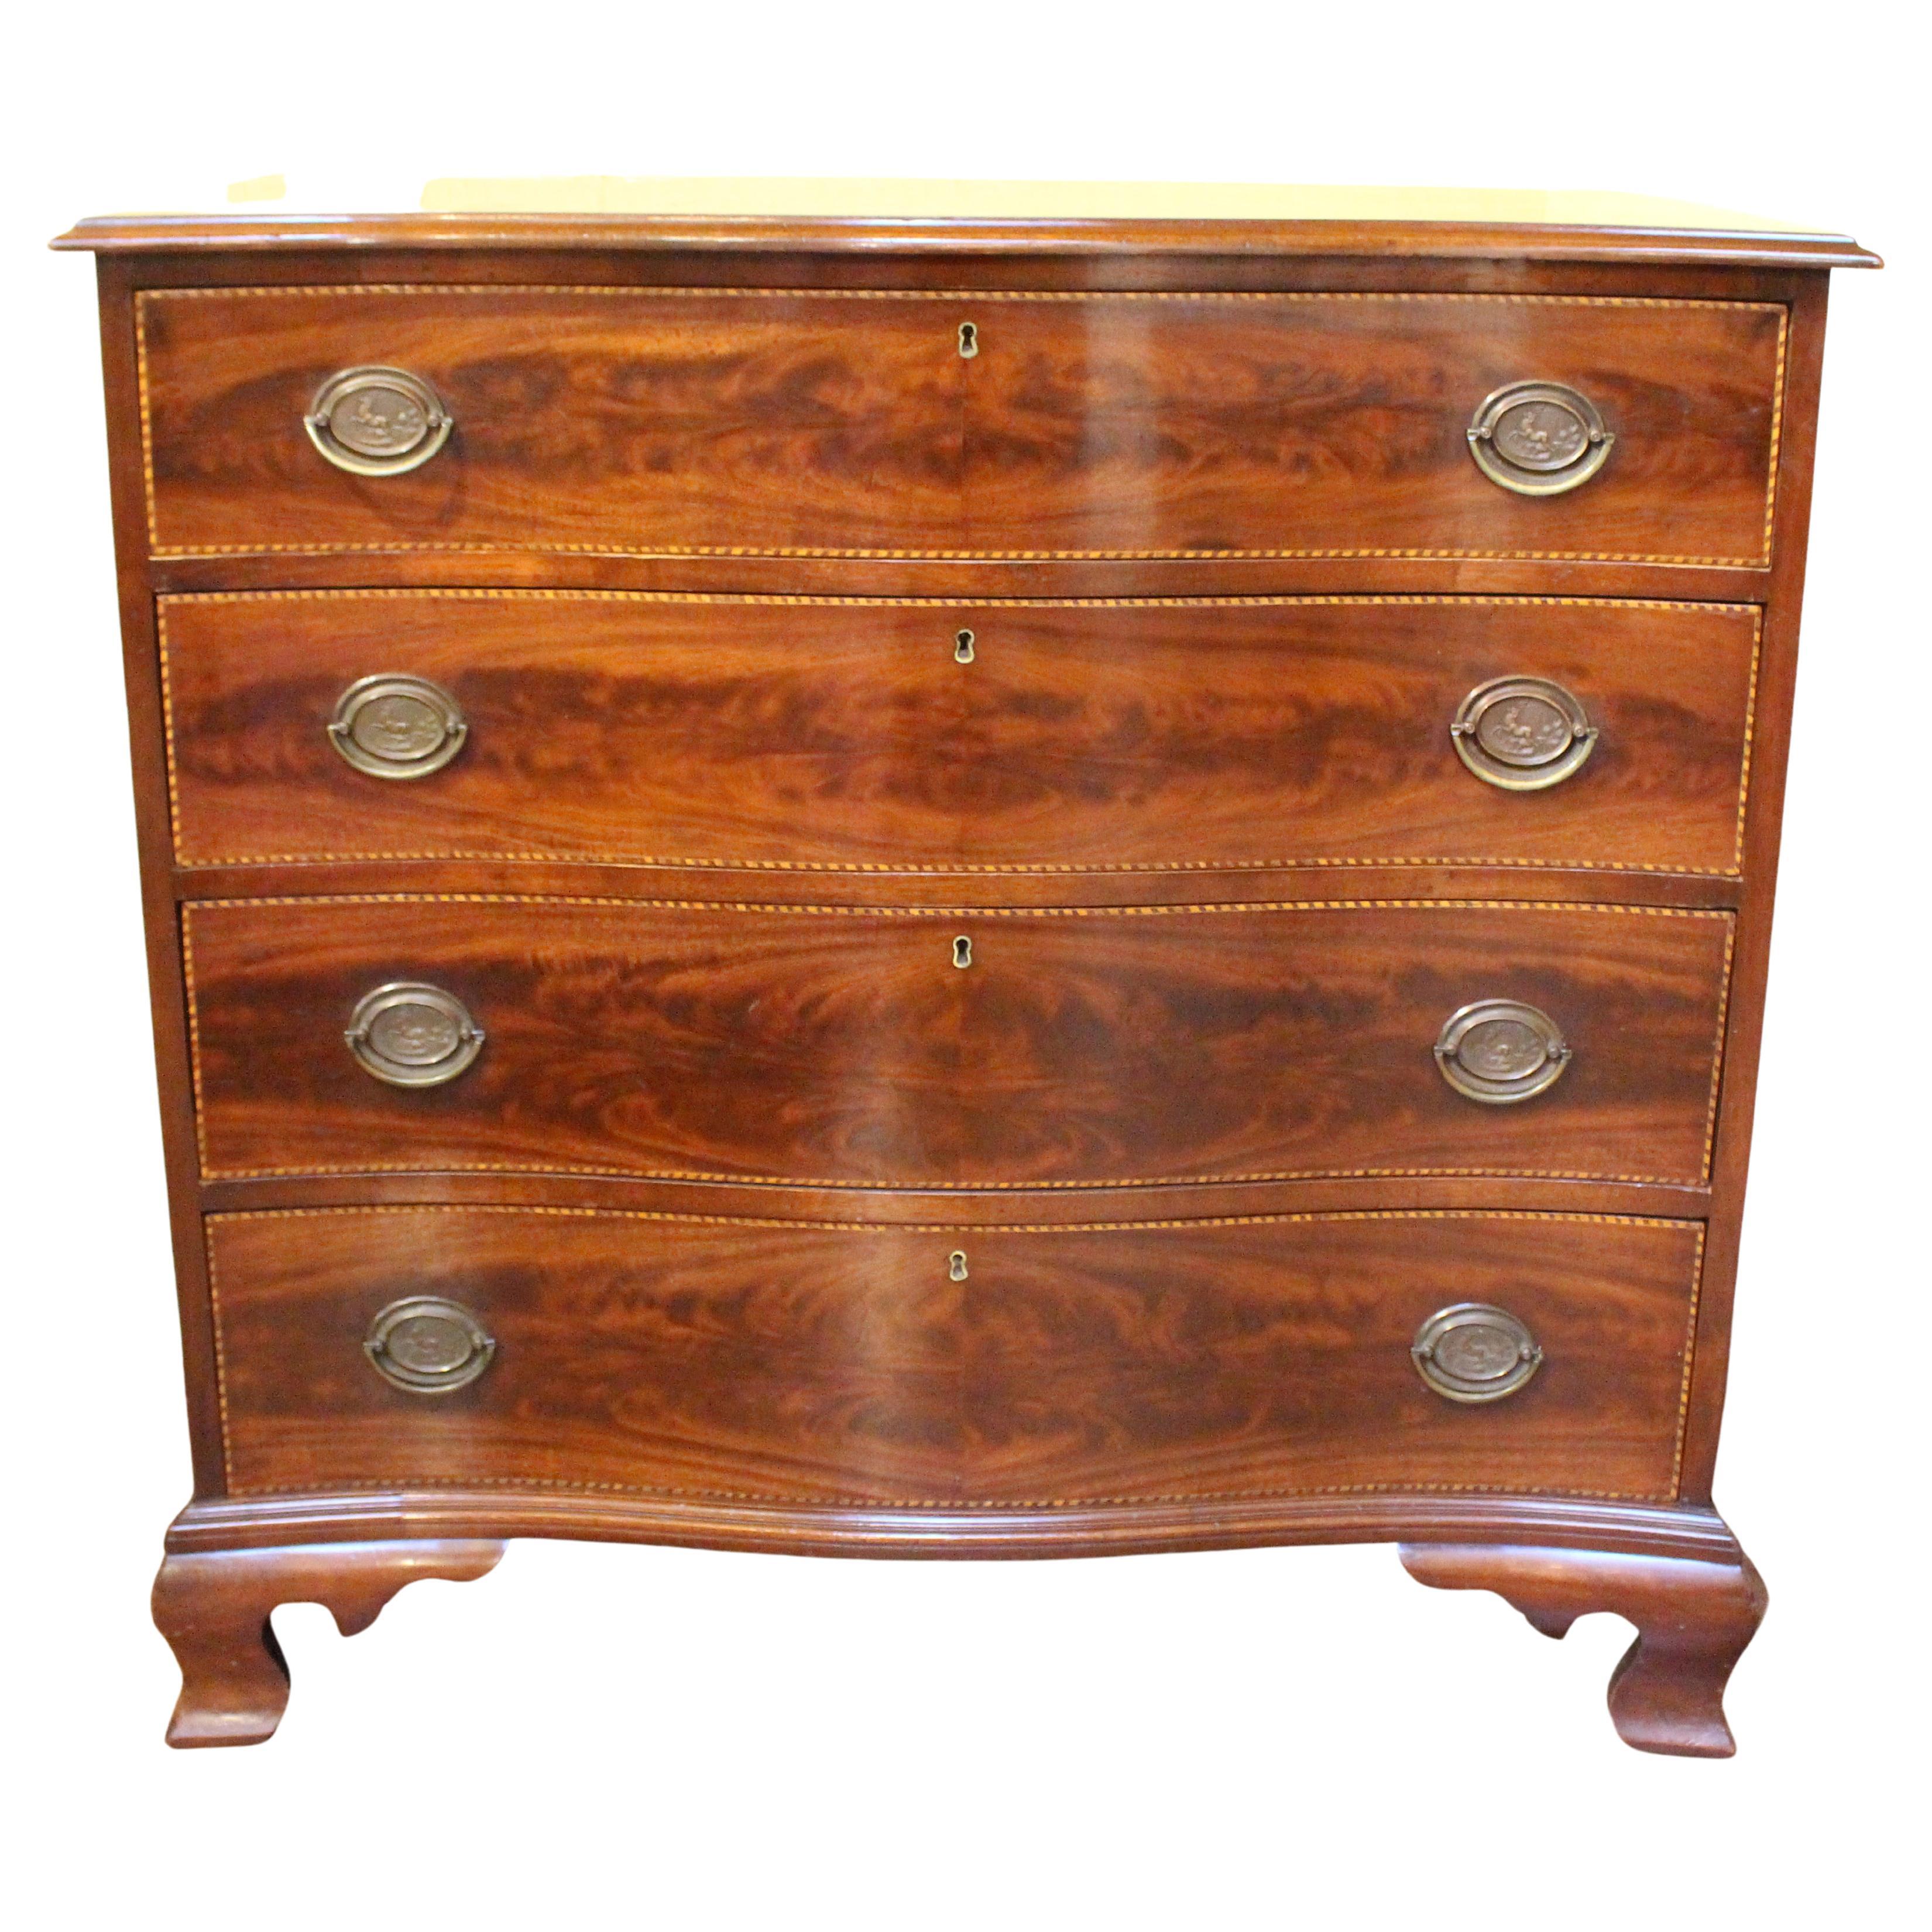 circa 1885-1915 Bench-Made Colonial Revival Serpentine Chest